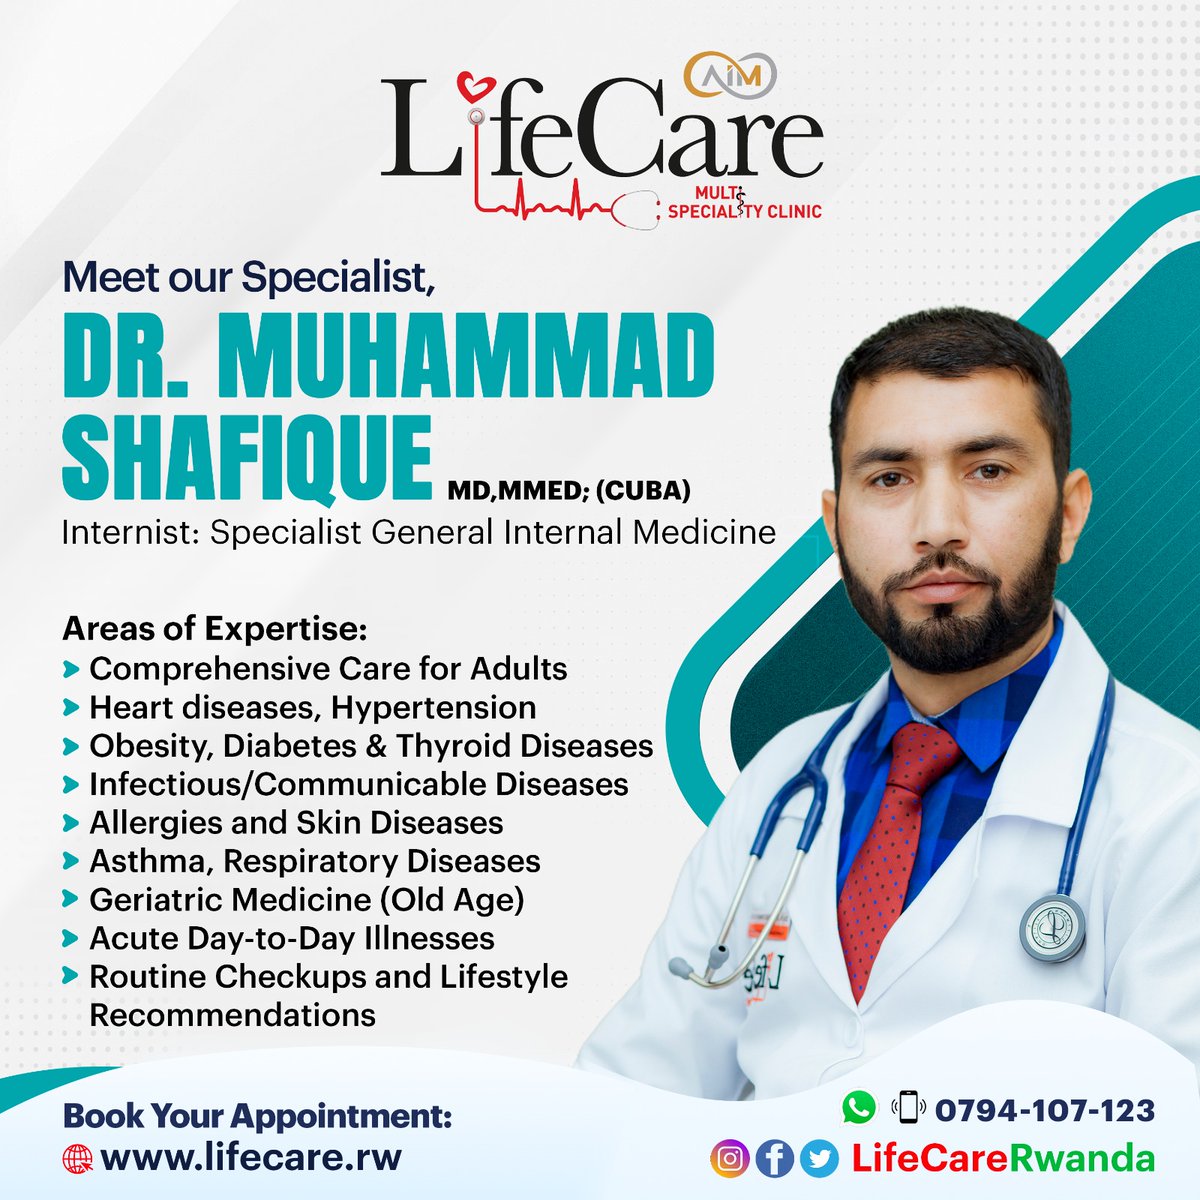 Introducing Dr. Shafique (specialised from Cuba) our Internal/ General Medicine Specialist, available full time during Clinic work hours.
Book an appointment online on lifecare.rw

#life #clinic #internist #rwanda #kigali  #lifecareclinic #universalhealthcare #health